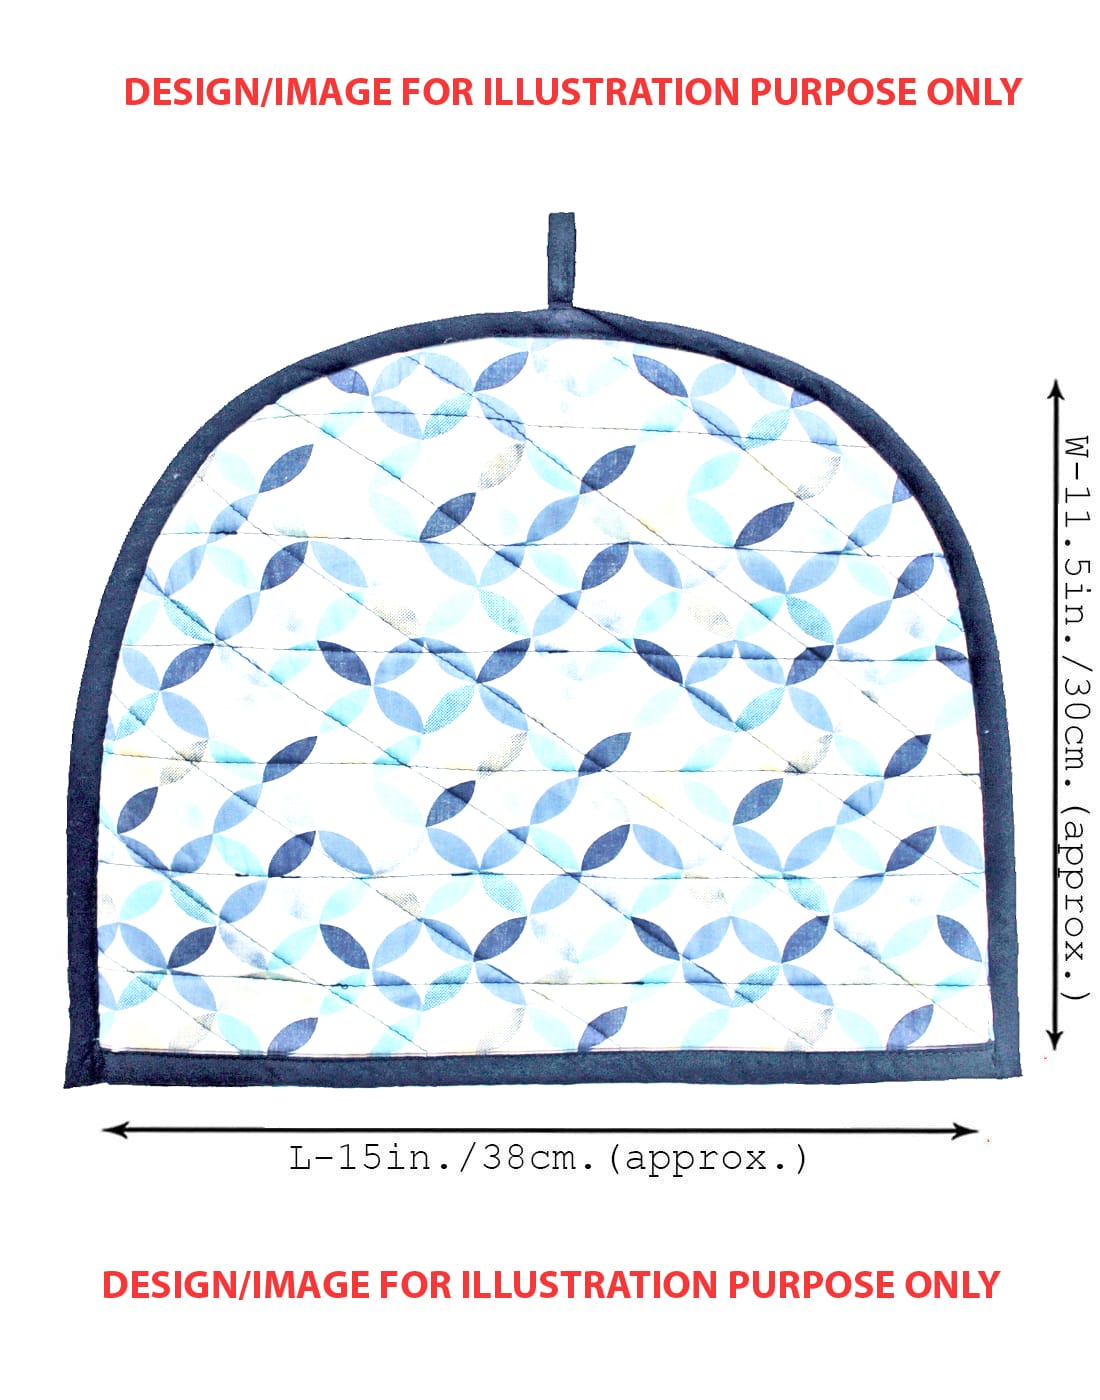 Printed Cotton Quilted Tea Cozy - Coffee